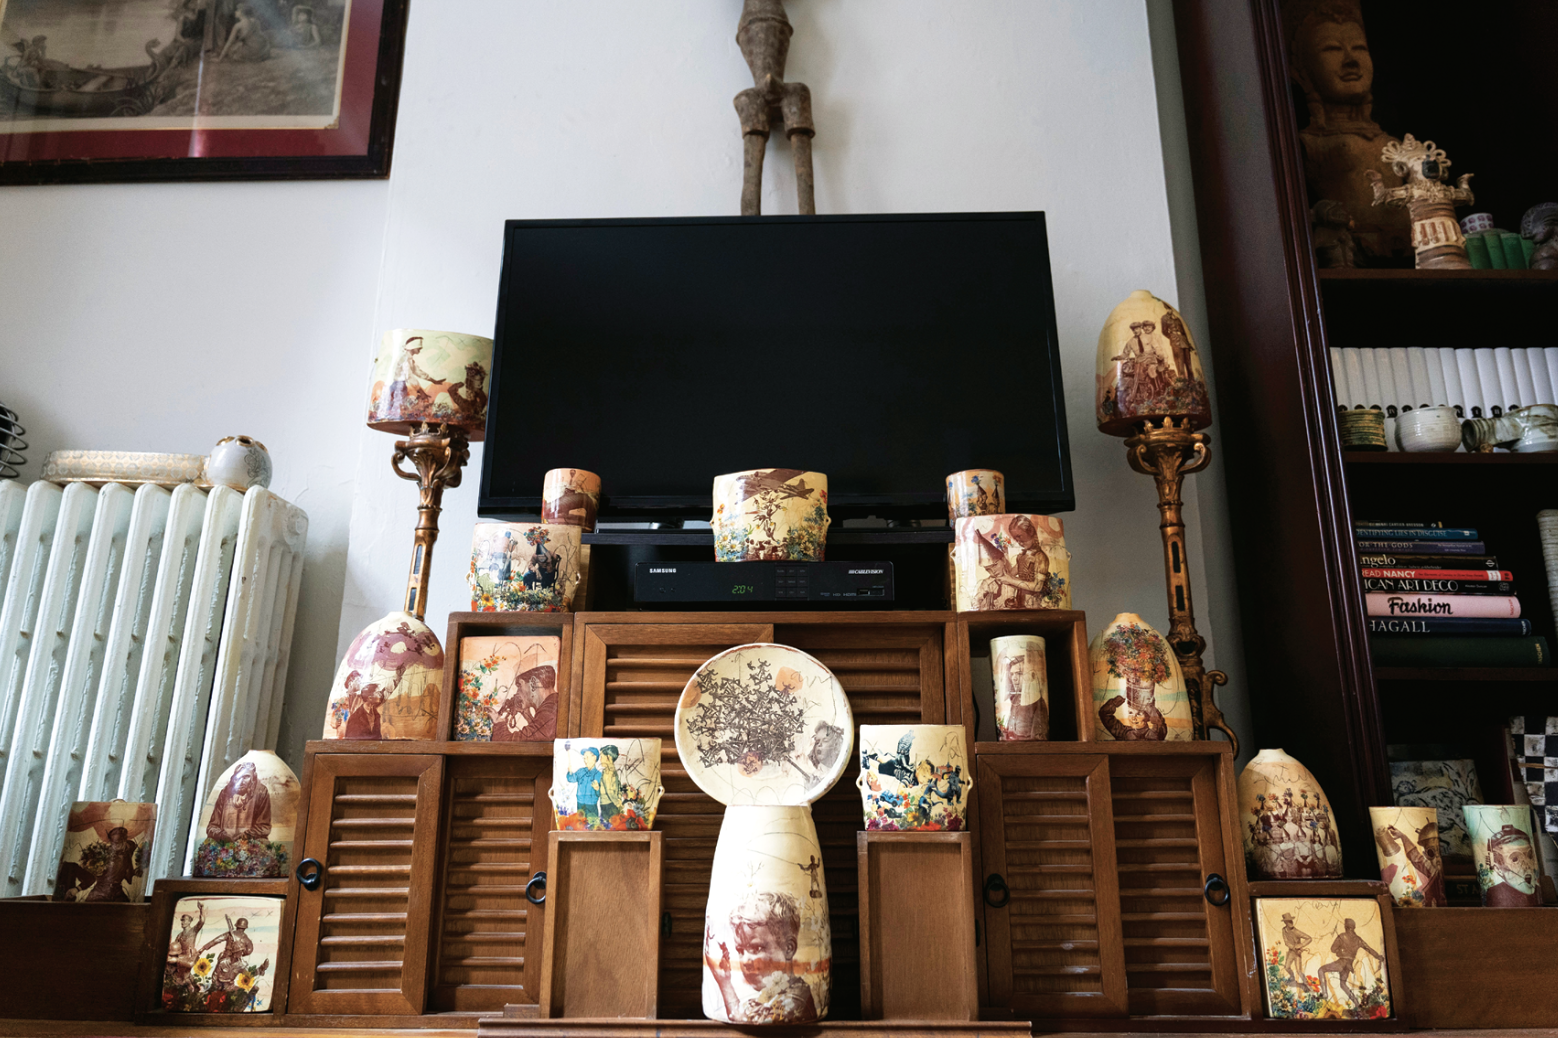 1 Middleton arranged a series of Eric Pardue pieces around his television set to form what he describes as a loose biographical montage. Photo: Avery Brunkus.